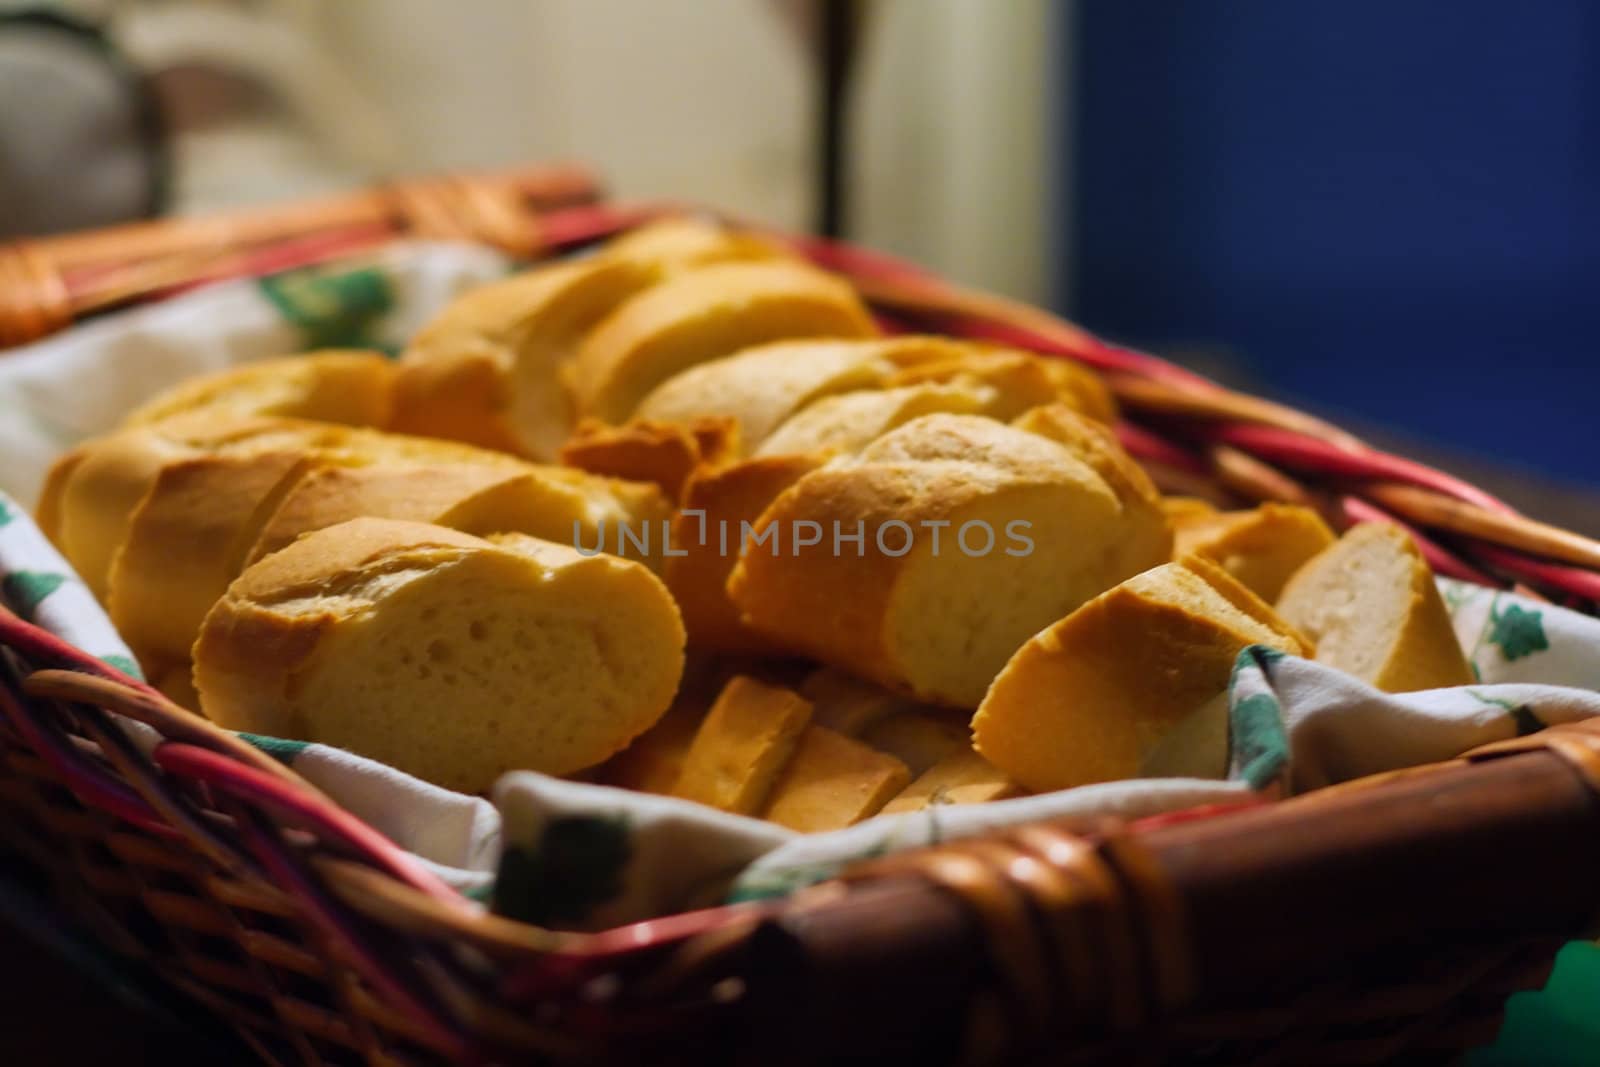 Basket of sliced bread with piece of cloth in the basket